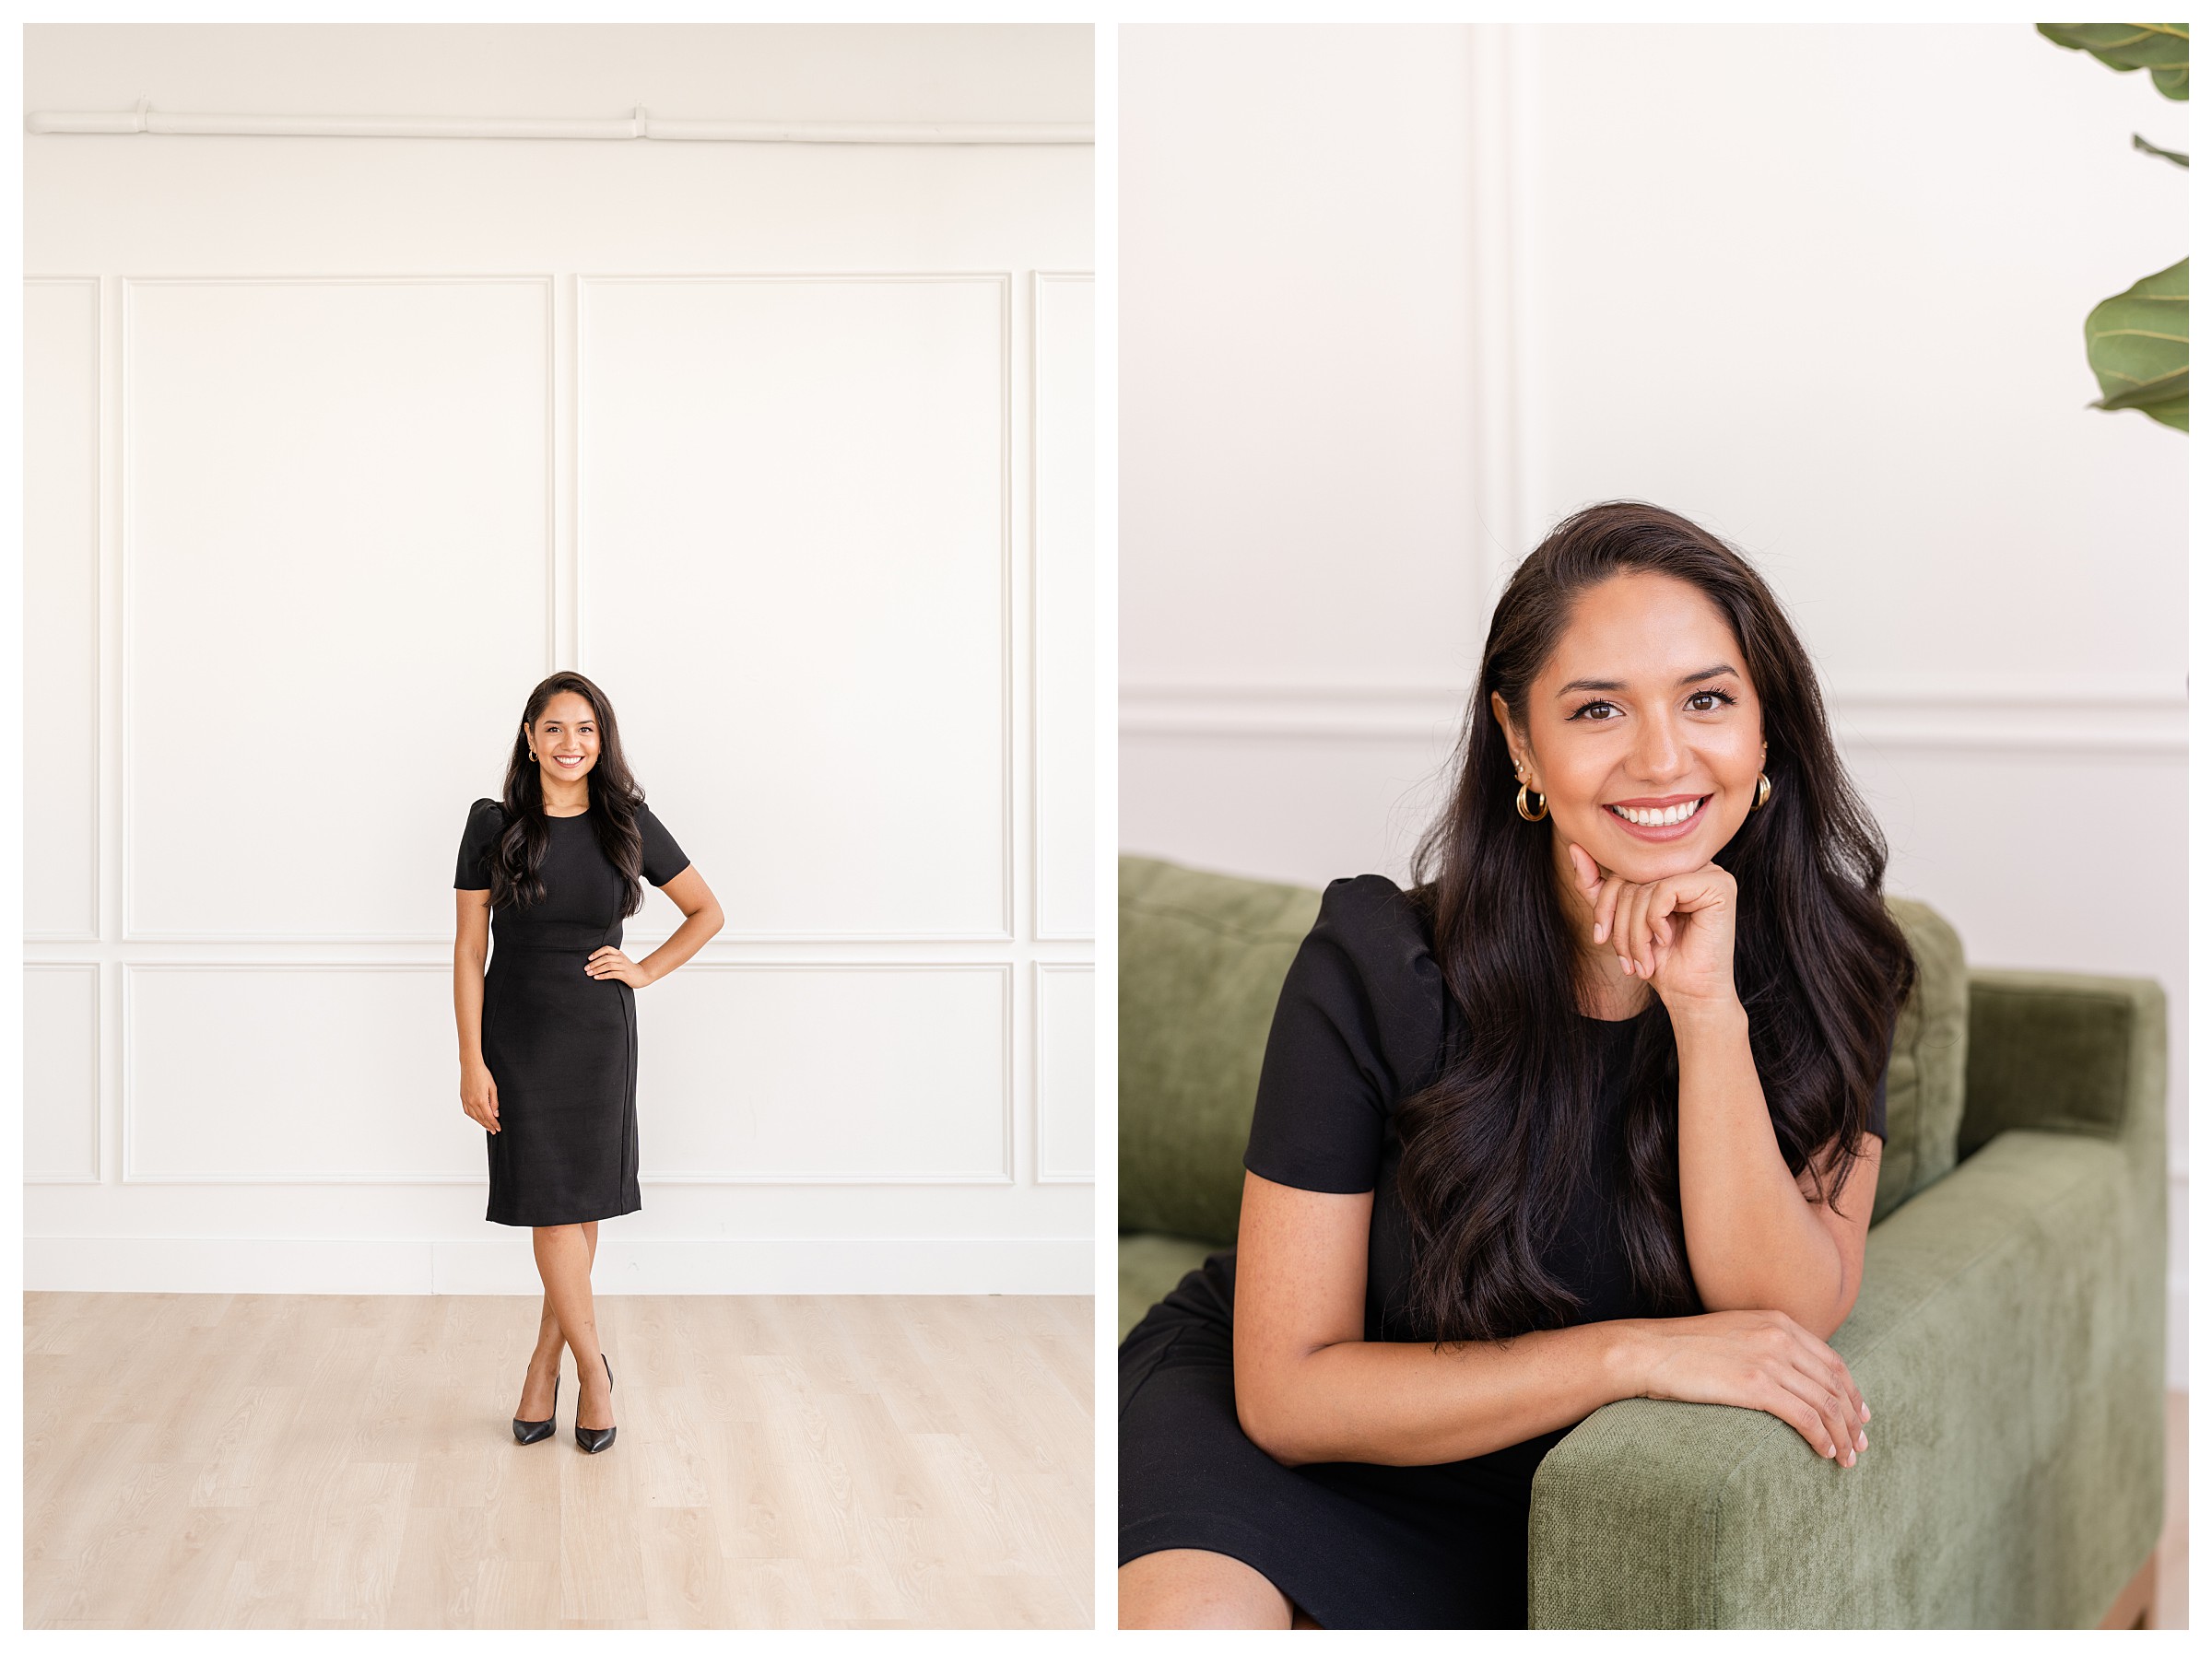 First image is woman standing in fitted black dress with hand on hip and smiling in Lumen Room studio in Houston. Second image is of the same woman sitting leaning on the arm of the green couch and resting chin on hand and smiling with white wall behind her in Lumen Room.